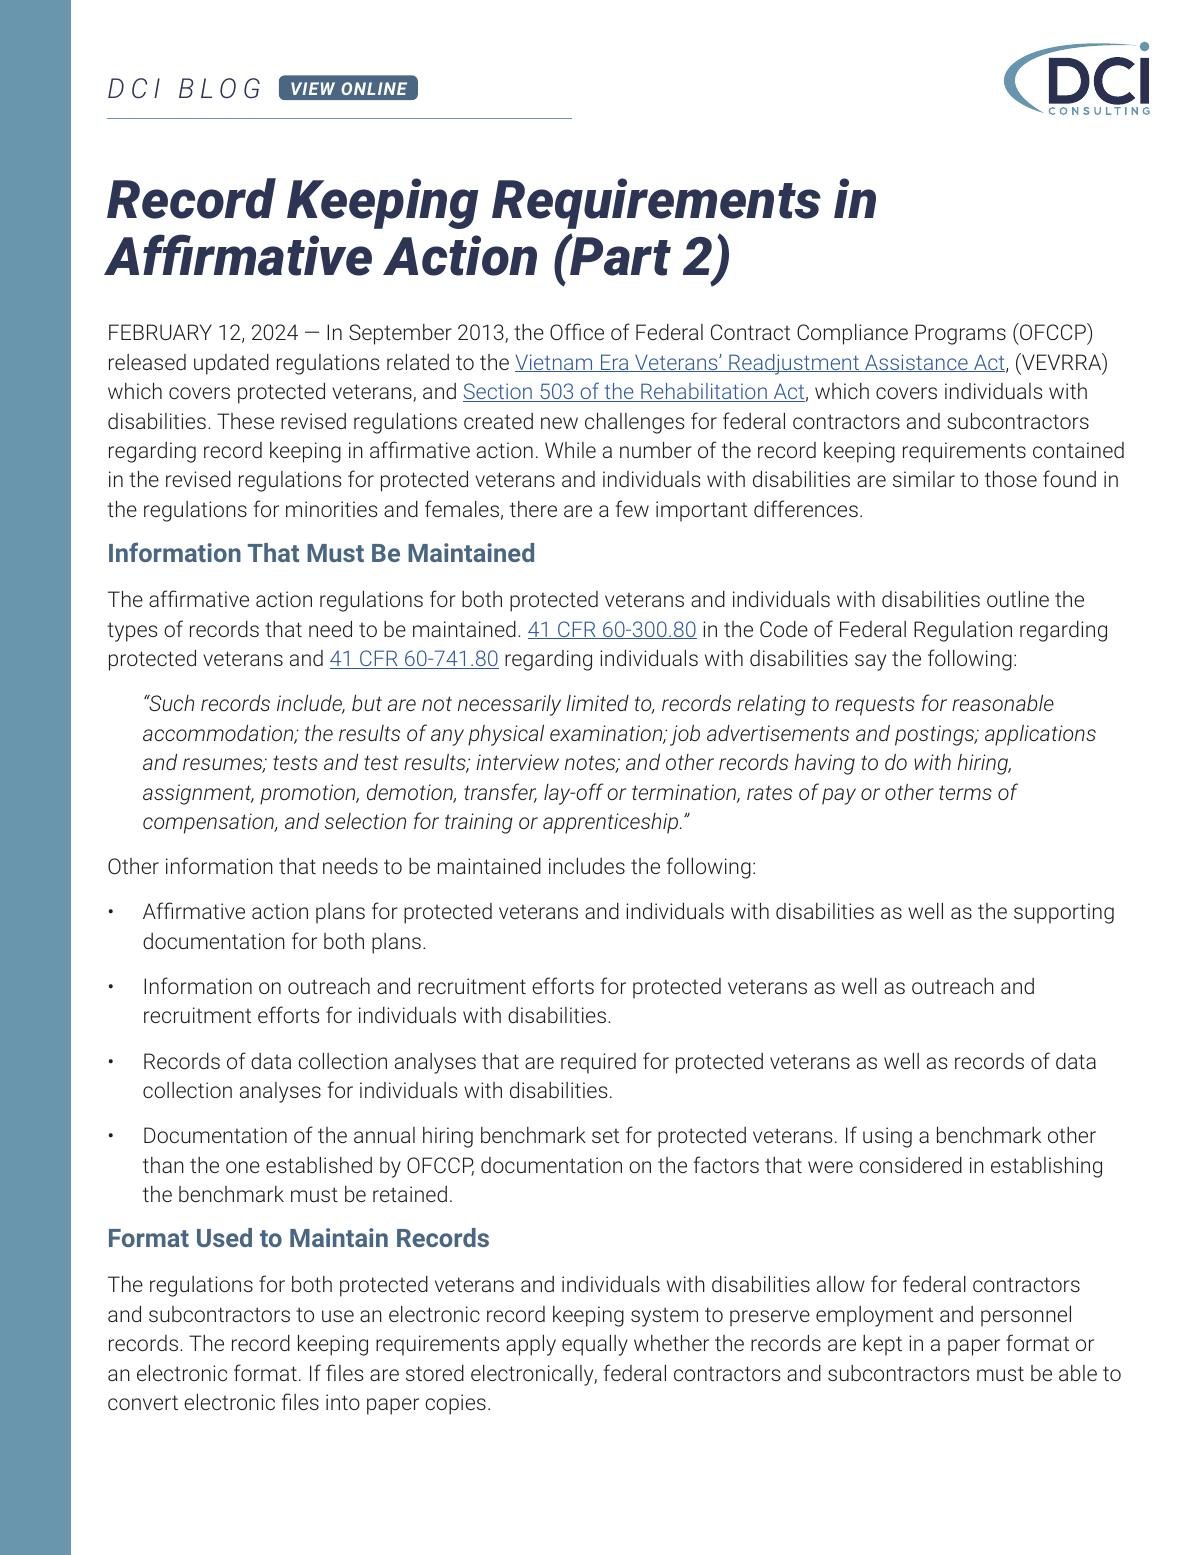 Record Keeping Requirements in Affirmative Action (Part 2)